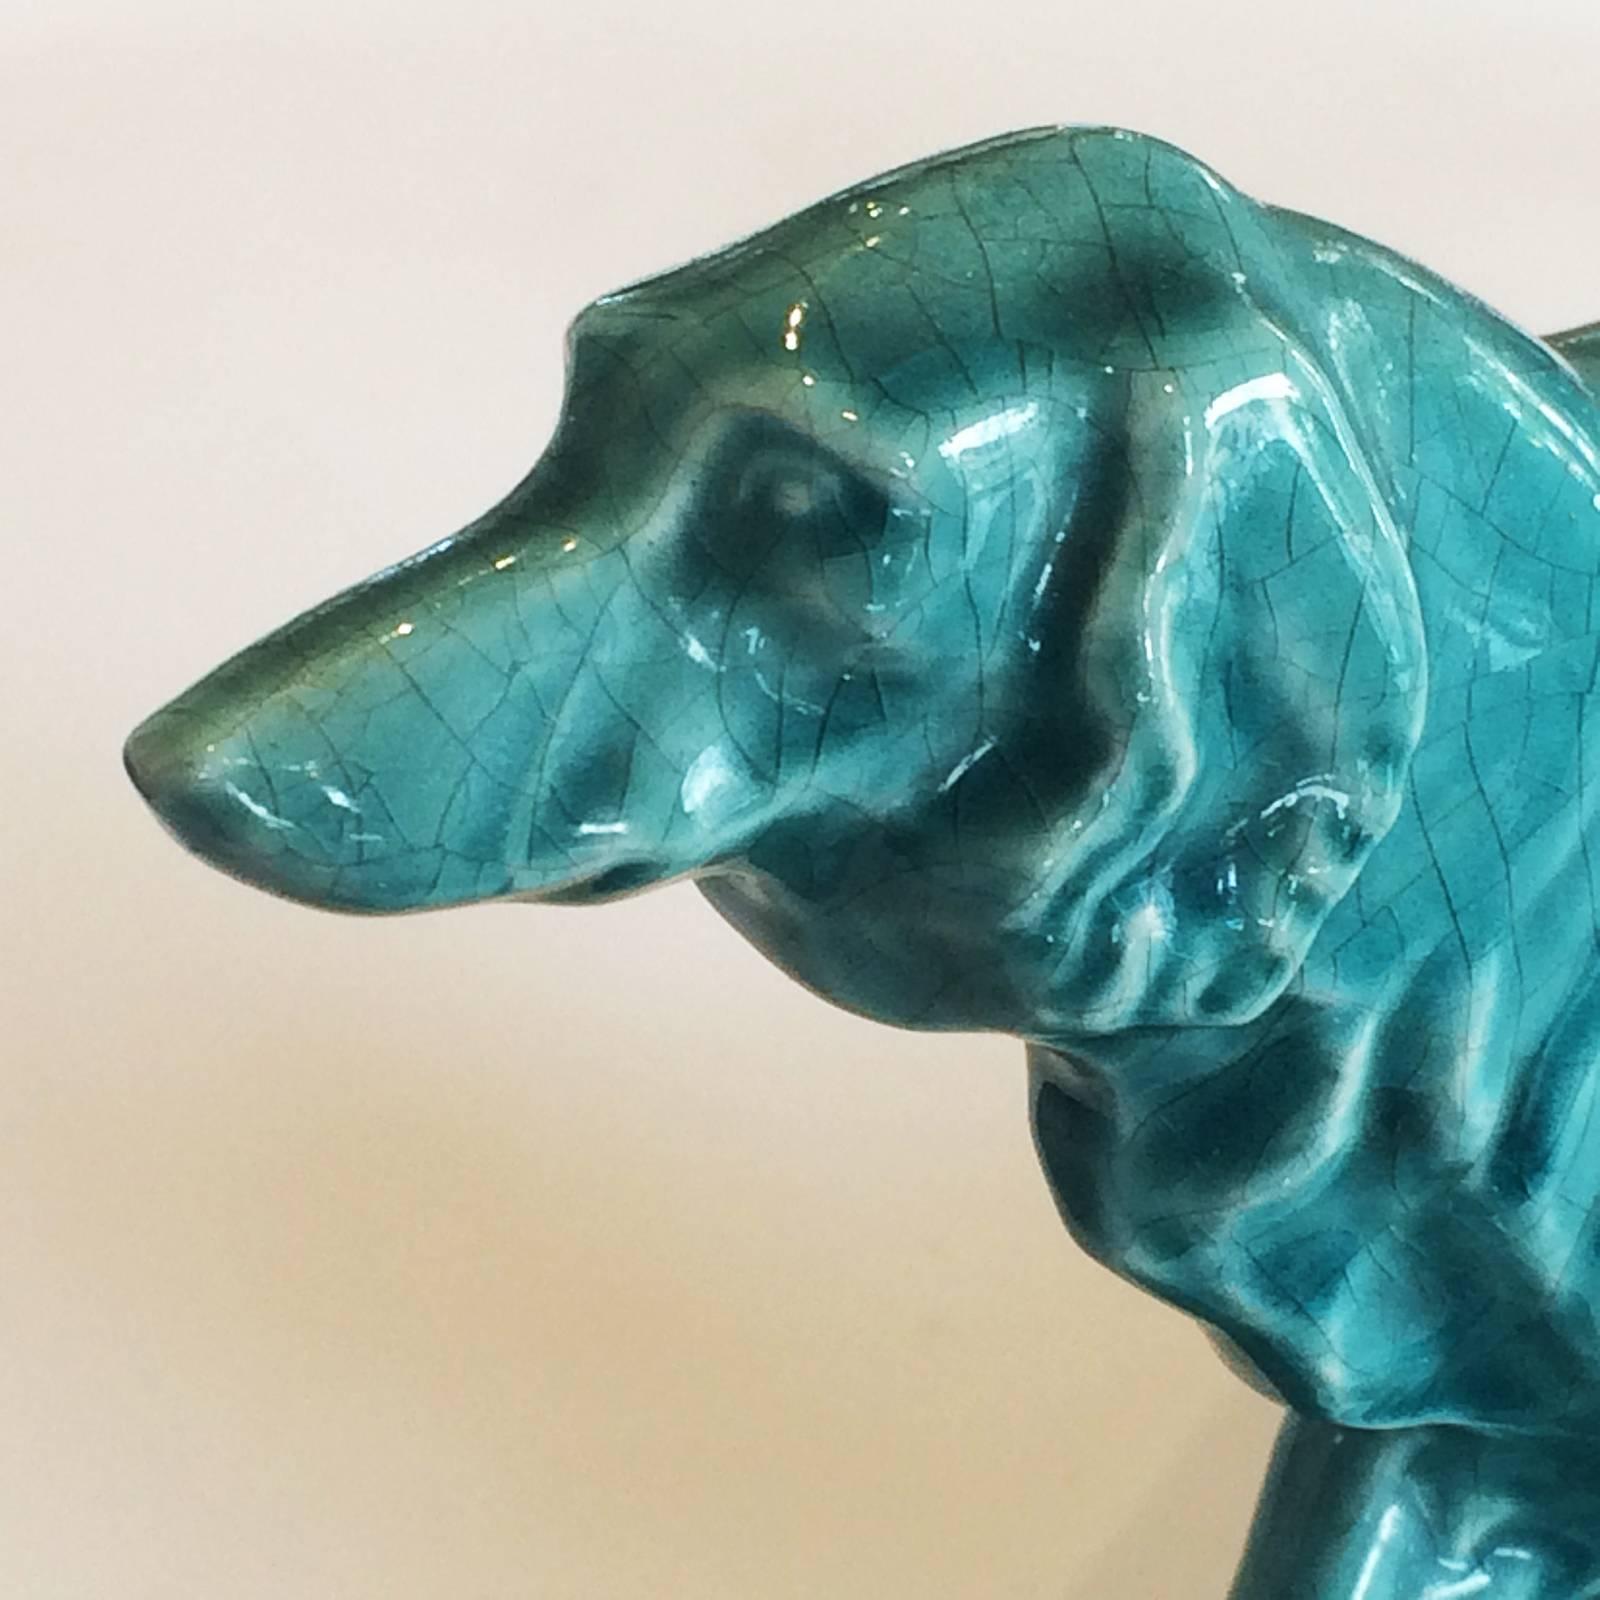 Art Deco statue of a French Borzoi dog, in blue craquele finish. Signed to the rear bottom plinth “LEJAN”. The dogs facial image is captured perfectly, and the proportions are excellent. Condition is excellent with only a tiny “pinhead” of glaze off